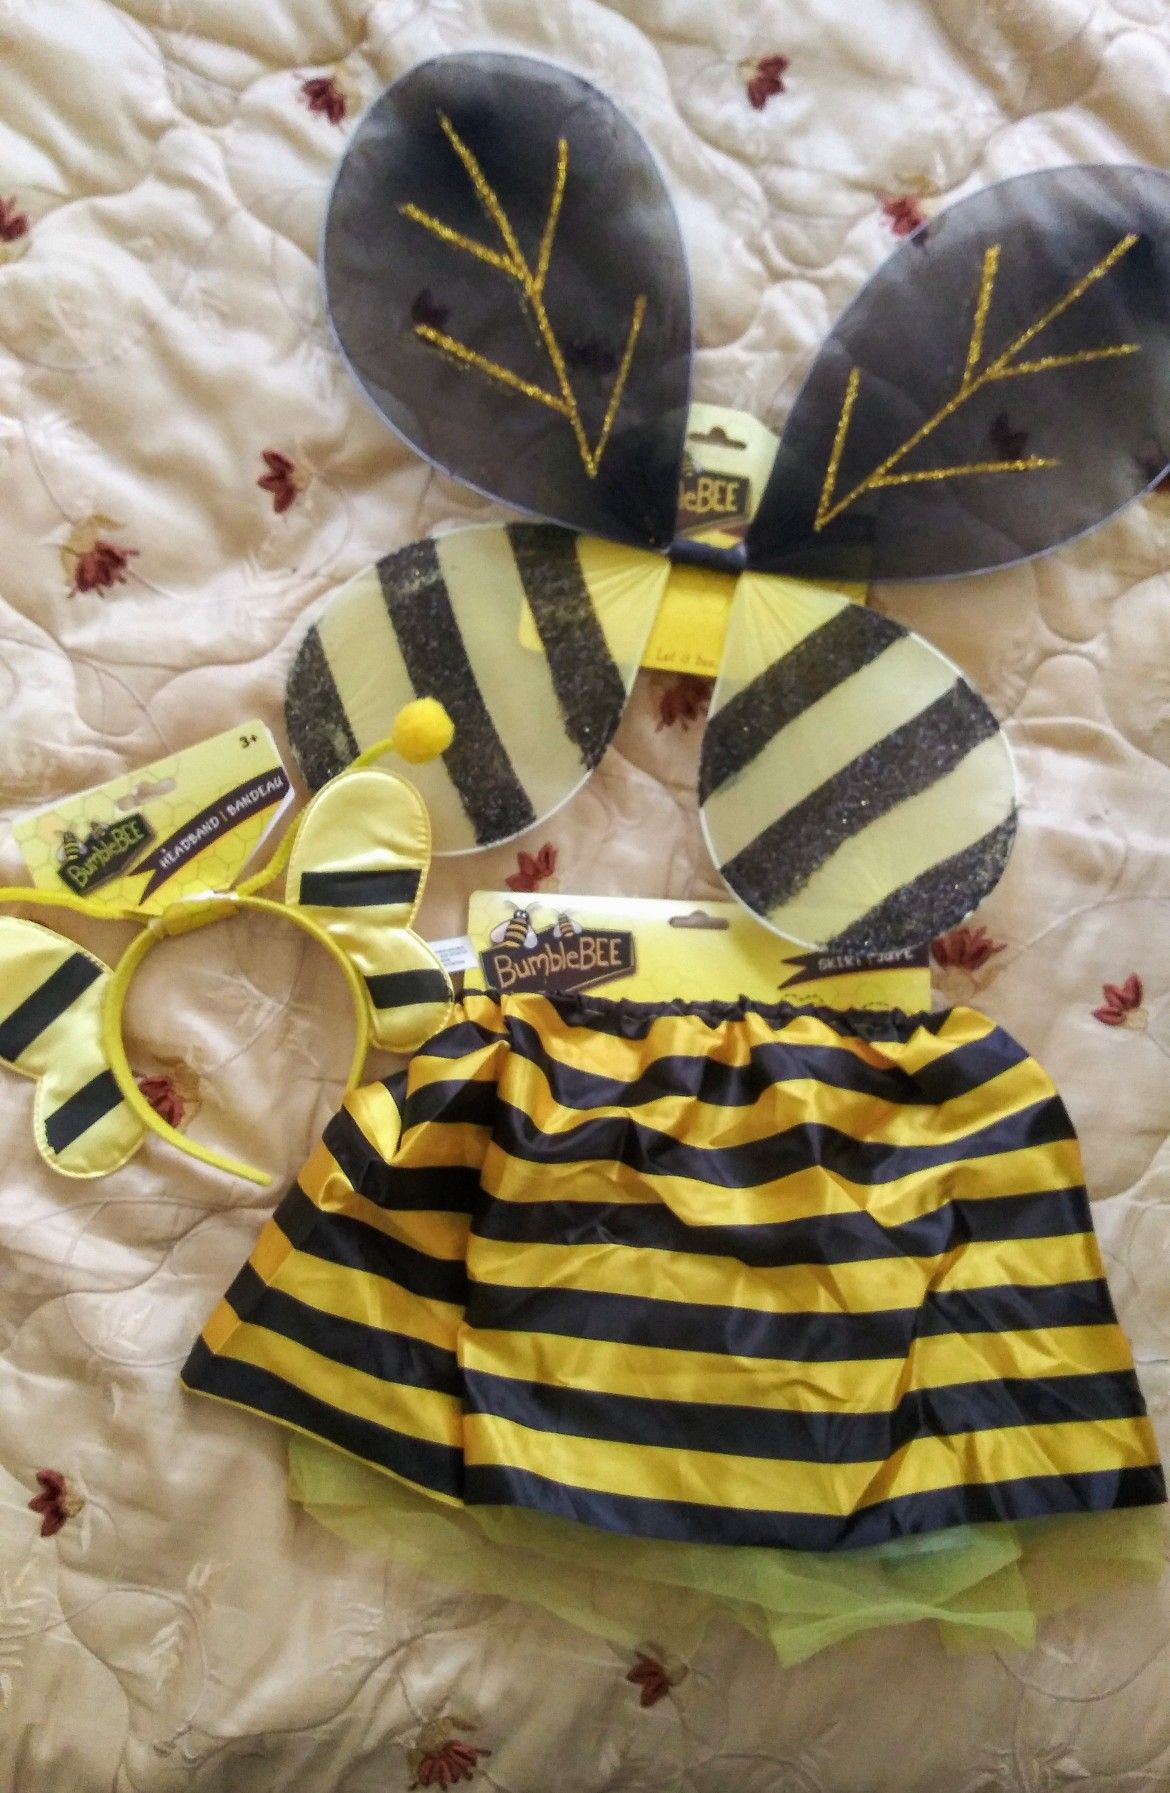 Bumble bee Costume size 3t